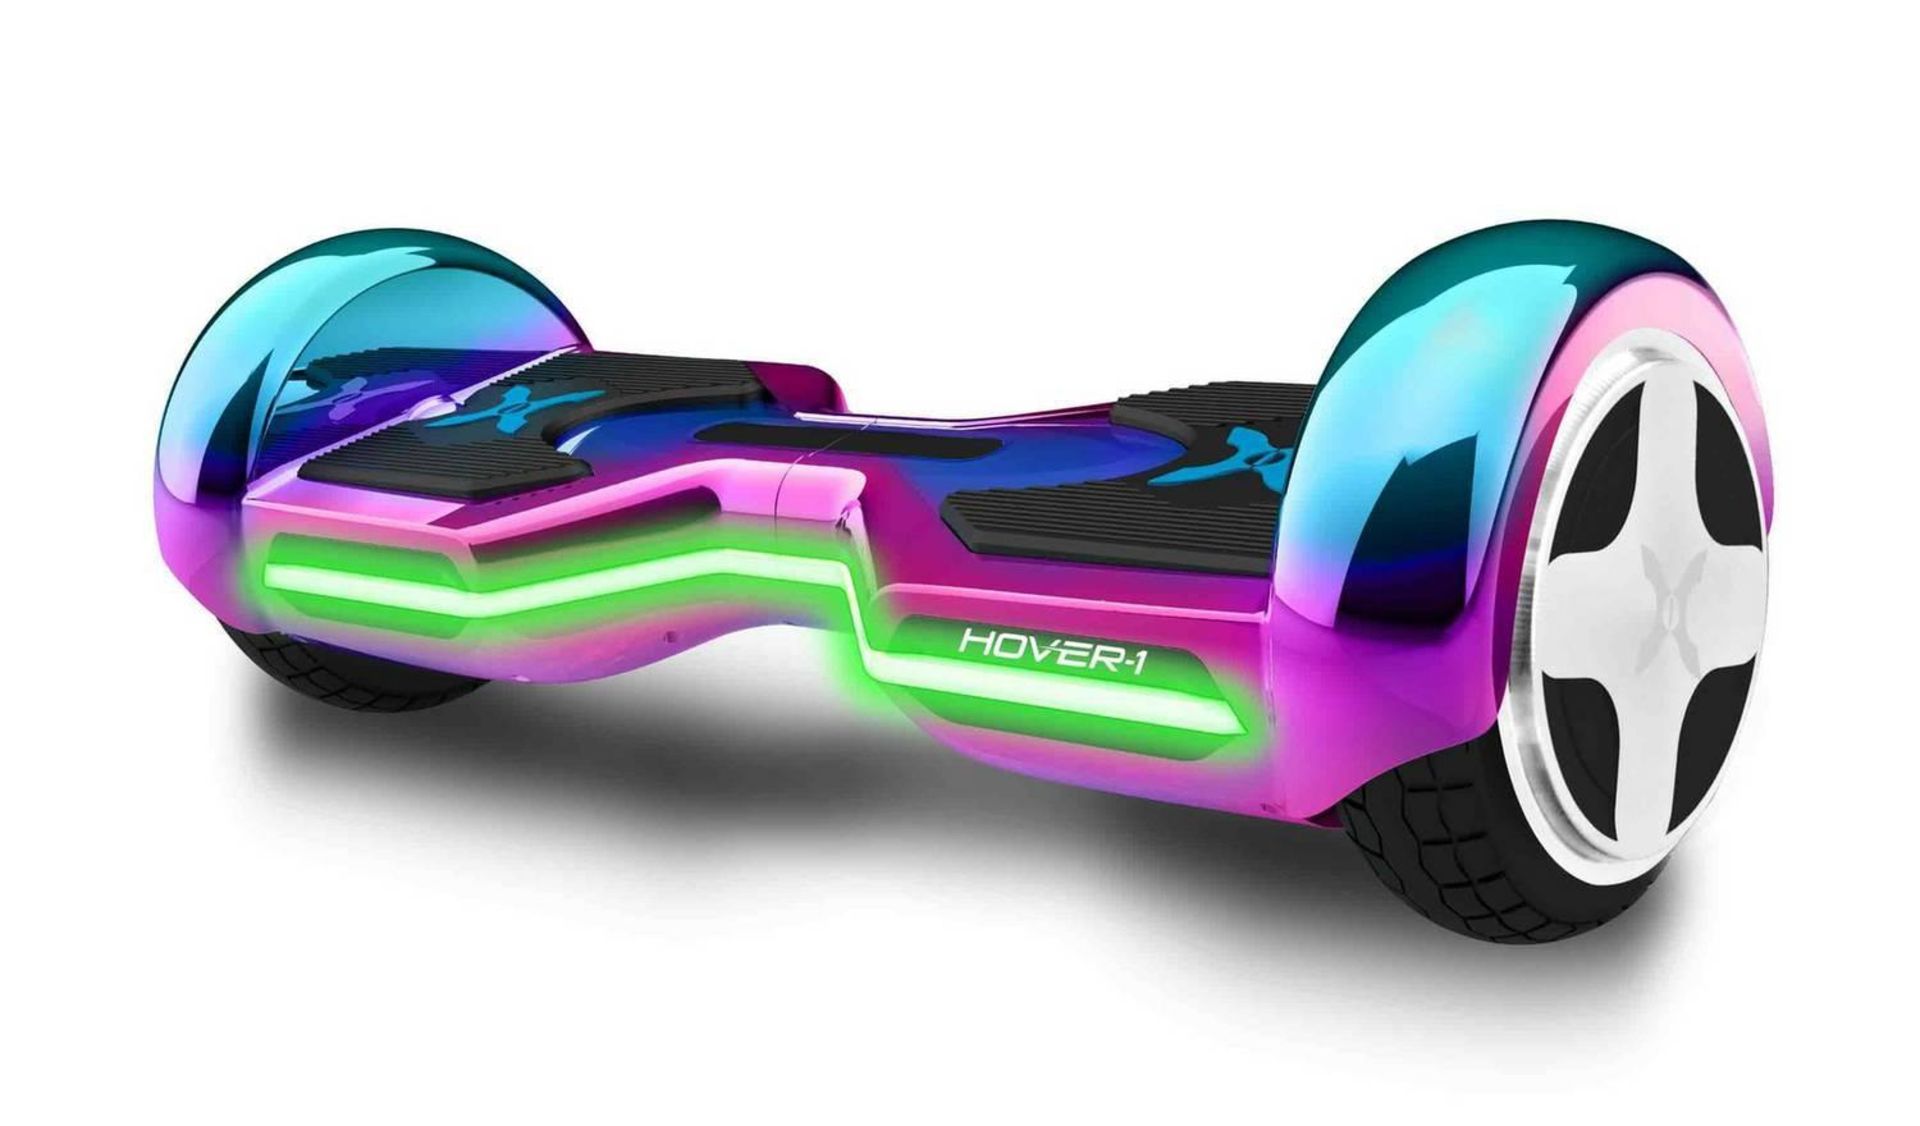 Hover-1 Horizon 8 Inch Wheel Iridescent Hoverboard, £269.99 RRP